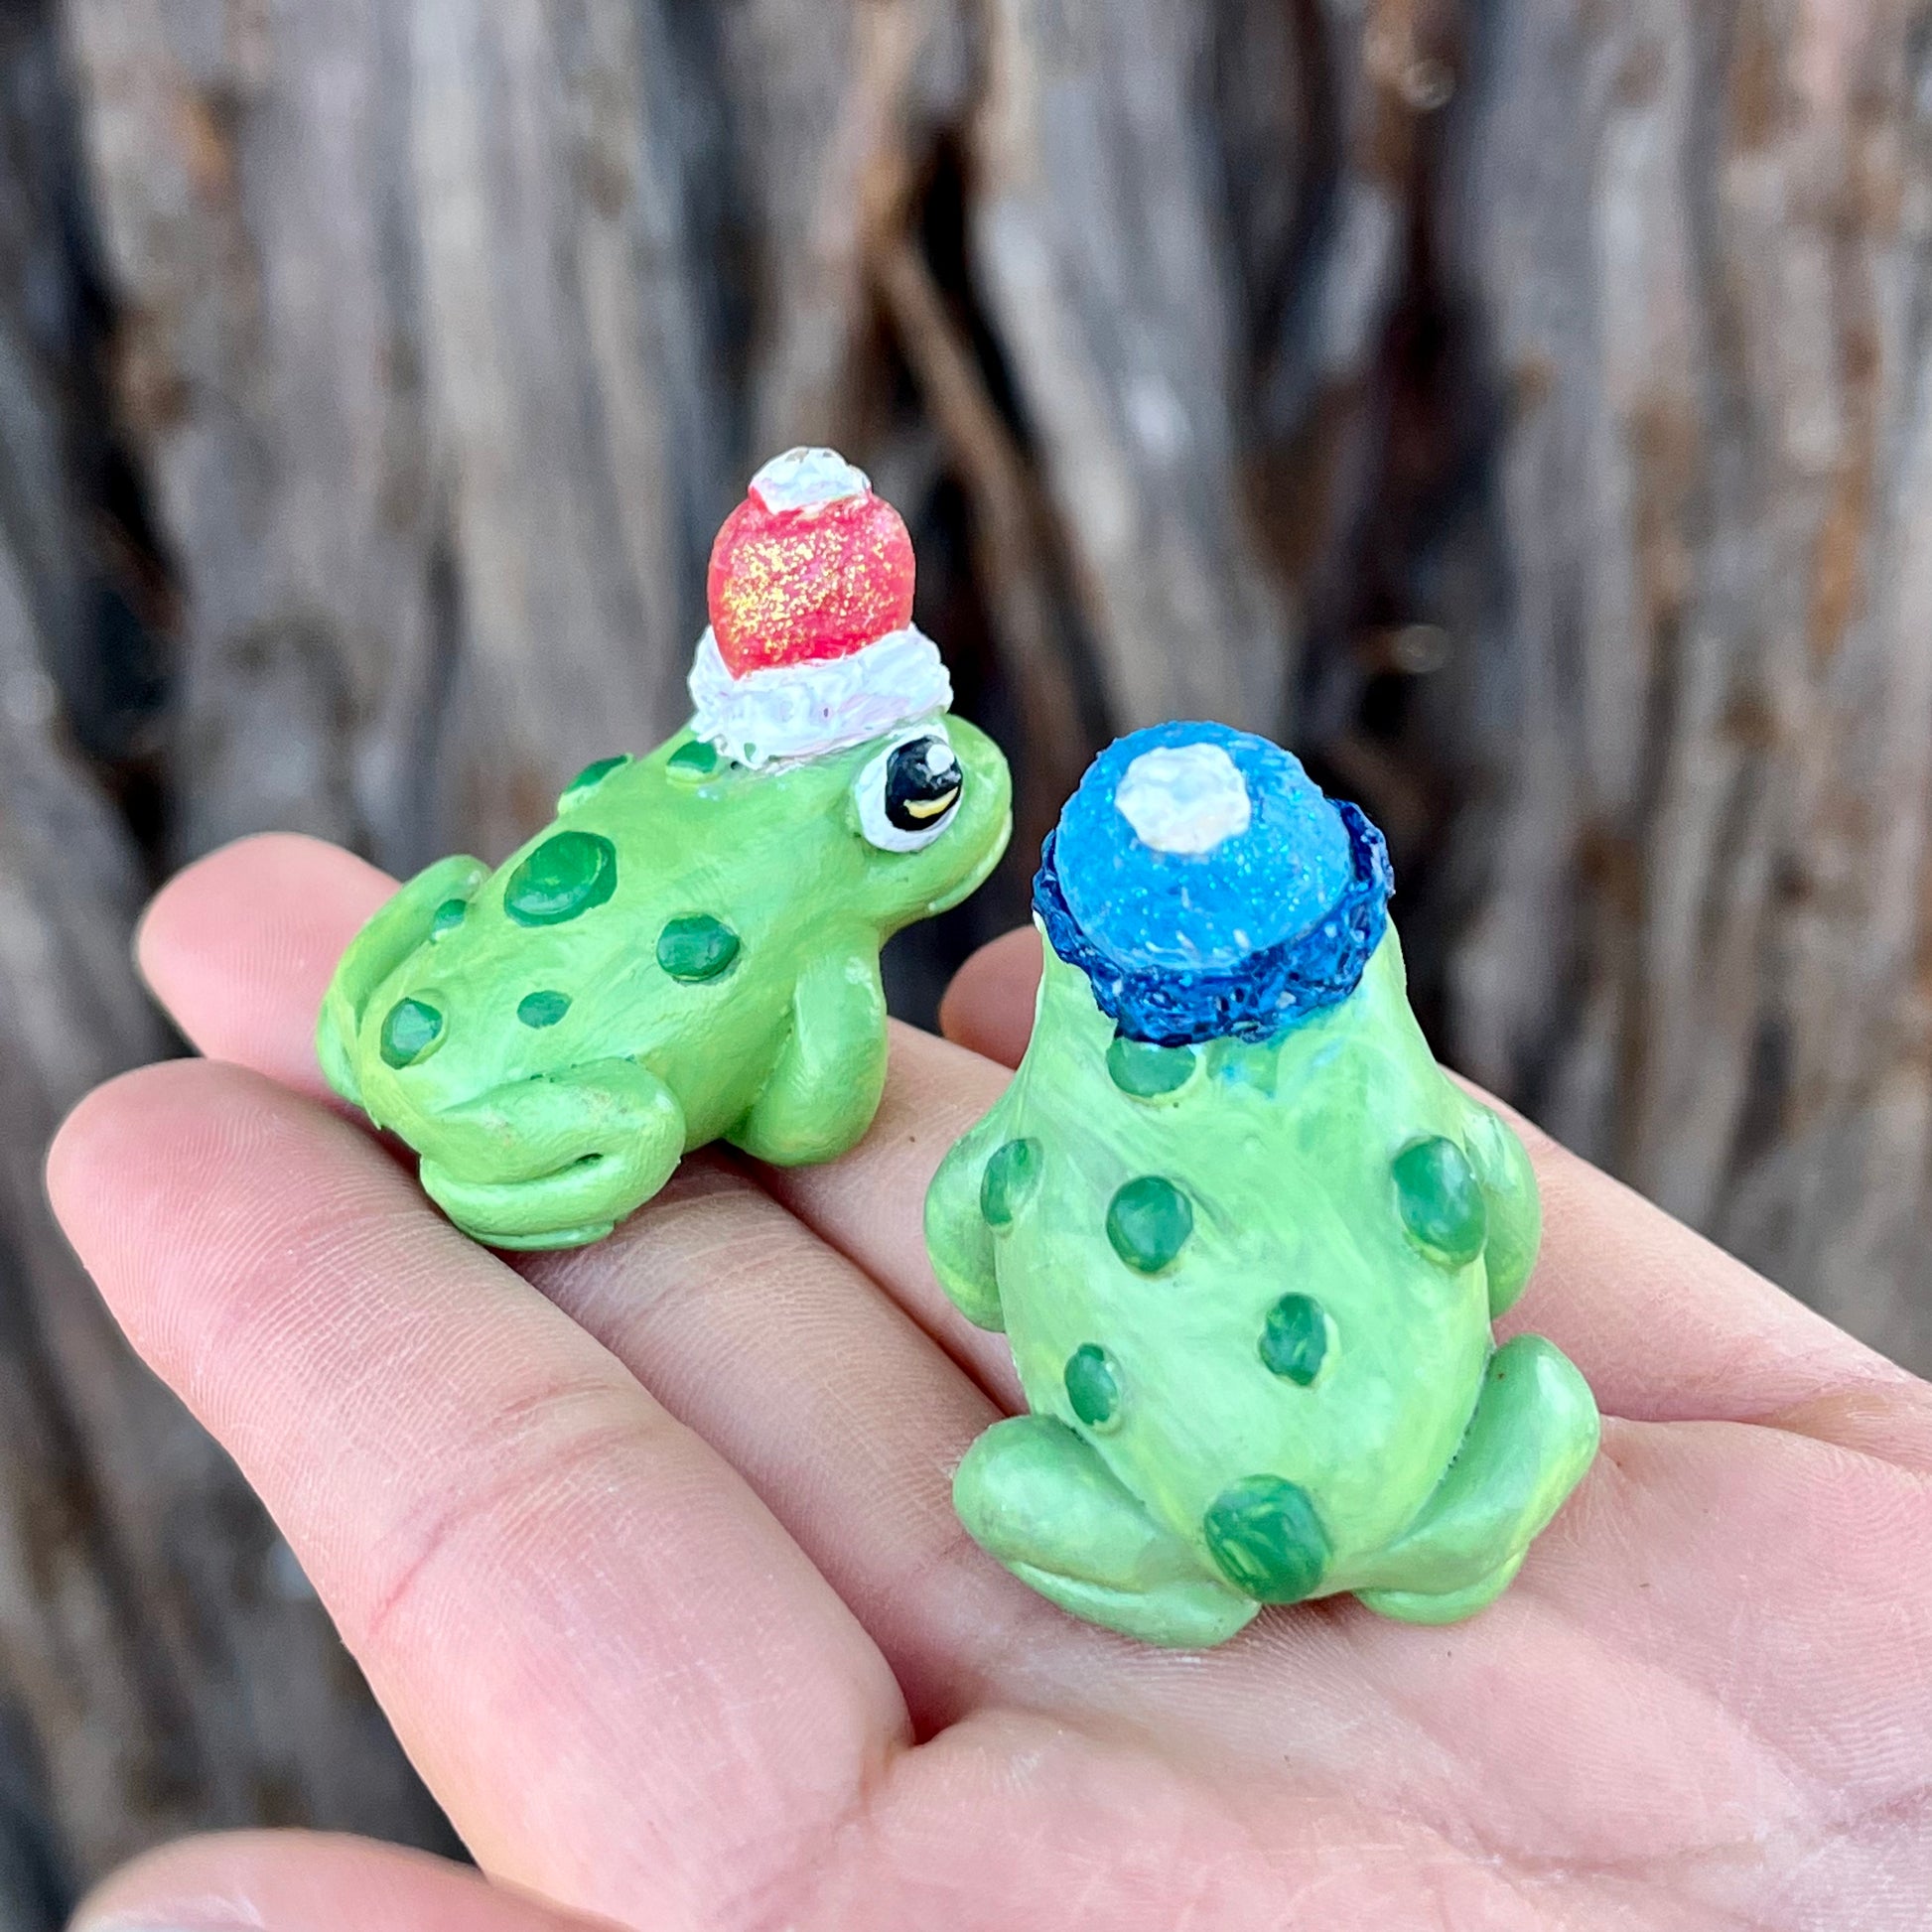 Handmade Polymer Clay Winter Cozy Toads with Knit Hat Mini